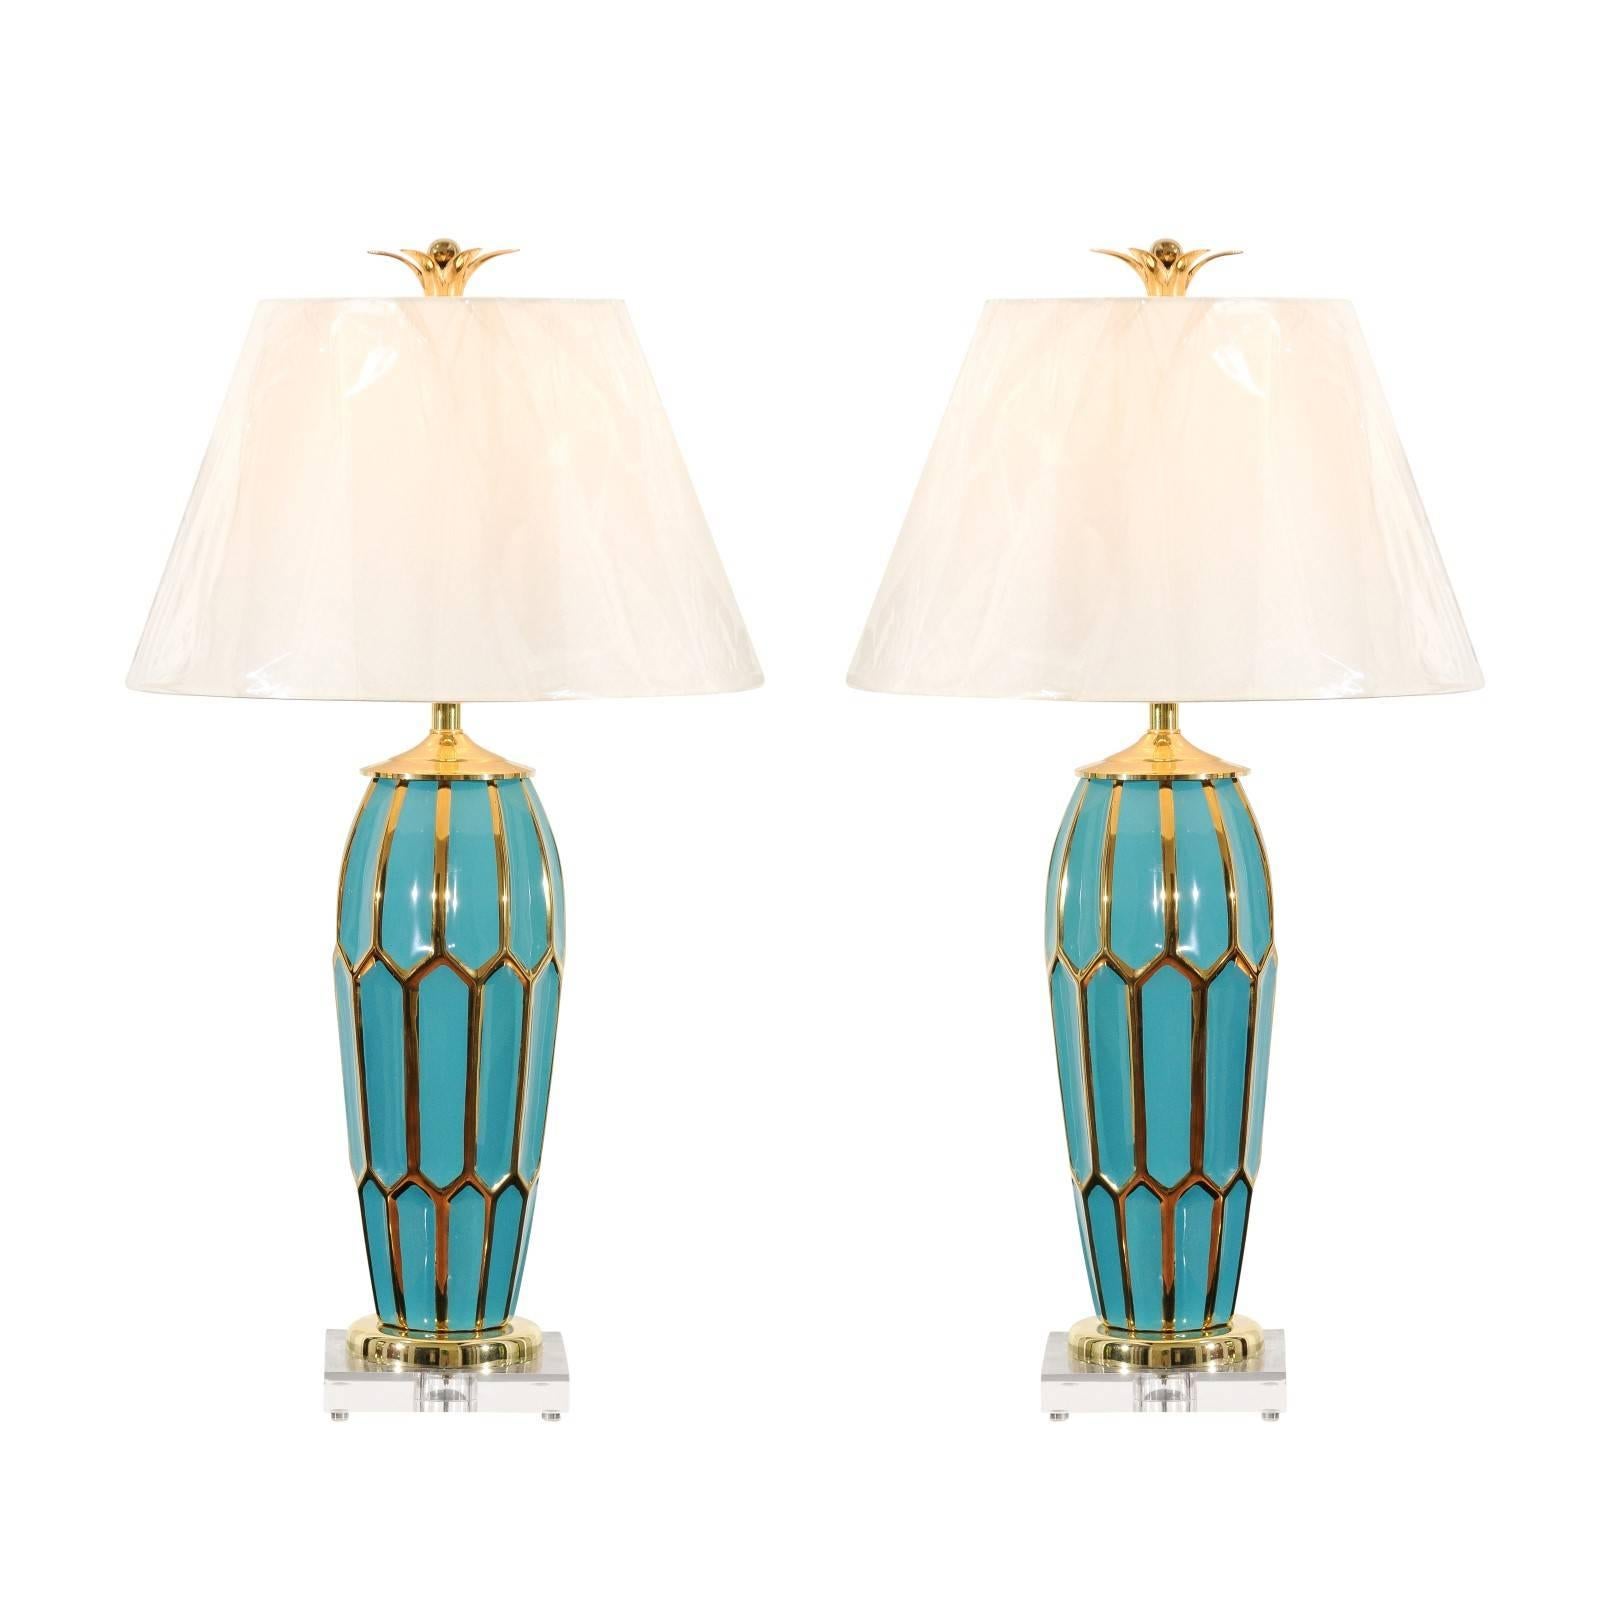 Striking Pair of Custom Ceramic Lamps in Turquoise and Gold